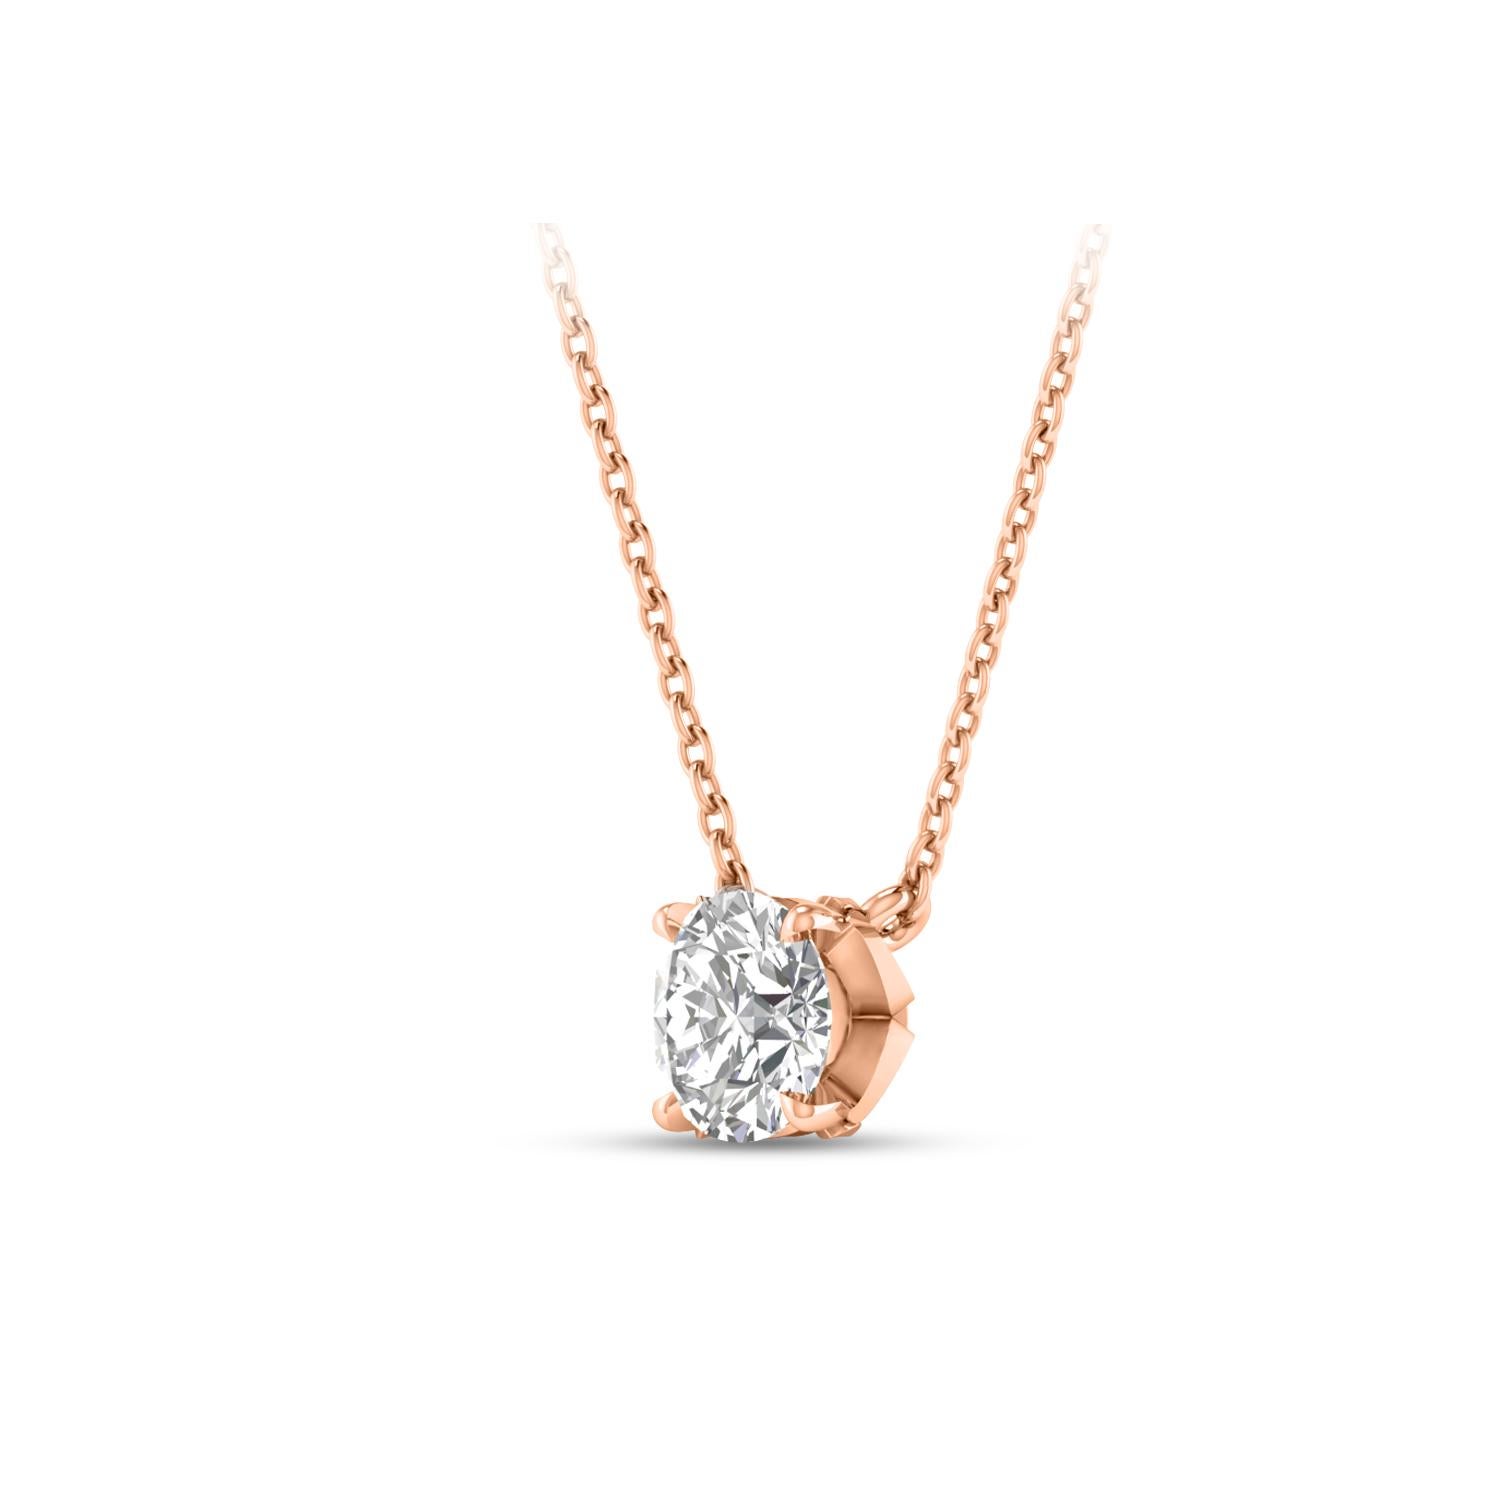 This solitaire diamond necklace features a single, brilliant-cut 0.33 carat diamond in prong setting crafted in 18 KT rose gold. This elegant necklace includes a 20-inch cable chain with extender at 18-inch.  

(Carat weights may vary slightly due